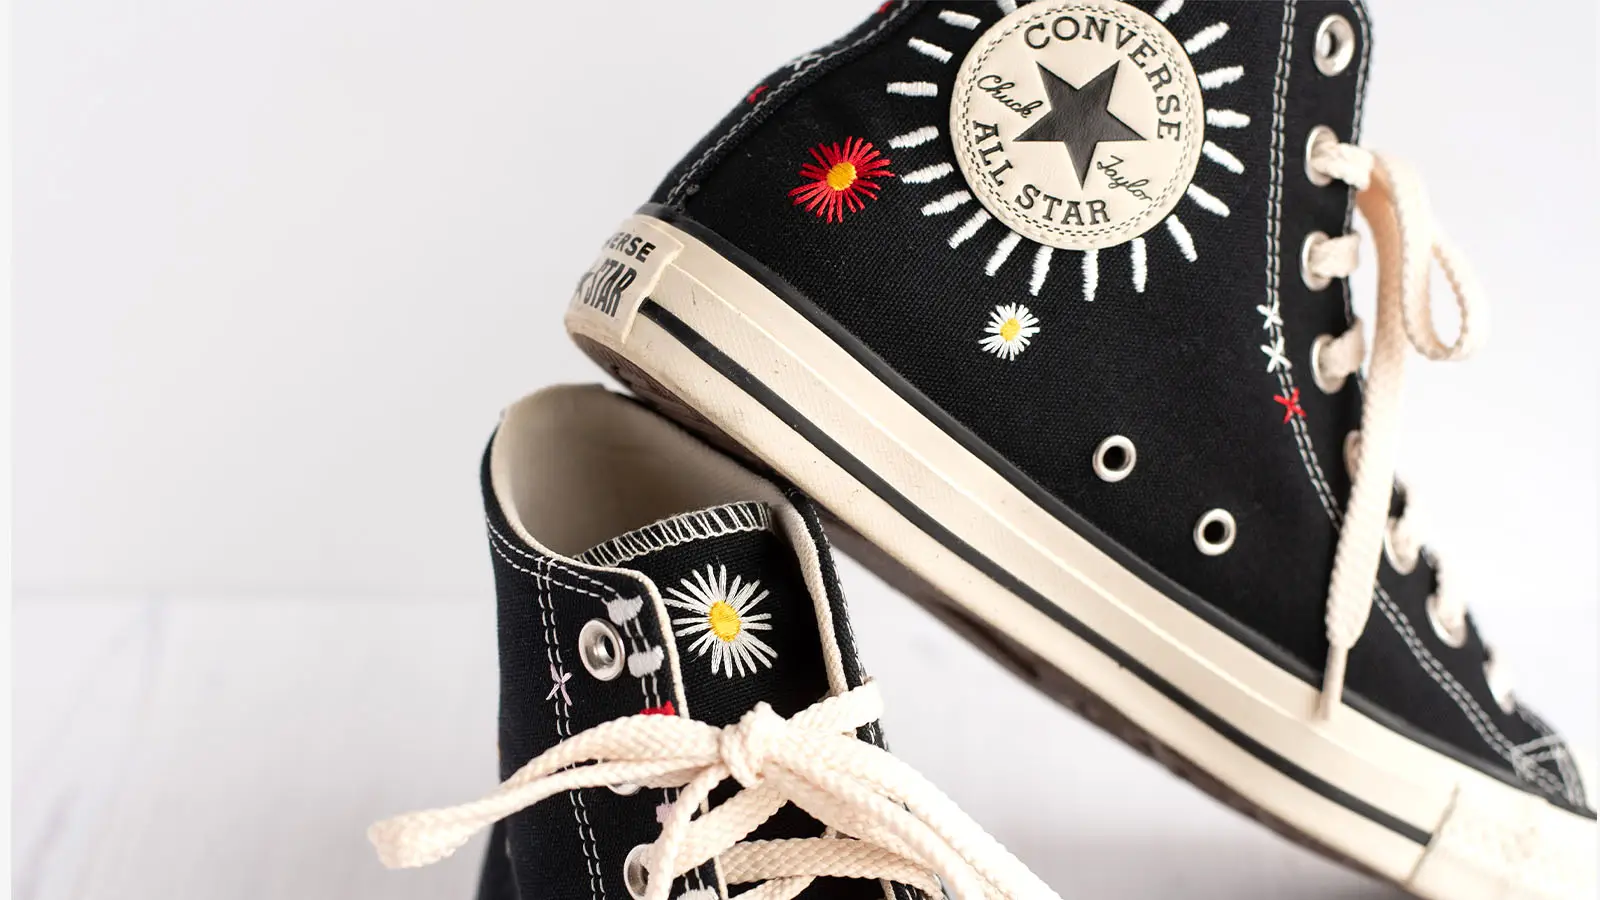 Why I could wear my Converse Chucks everyday